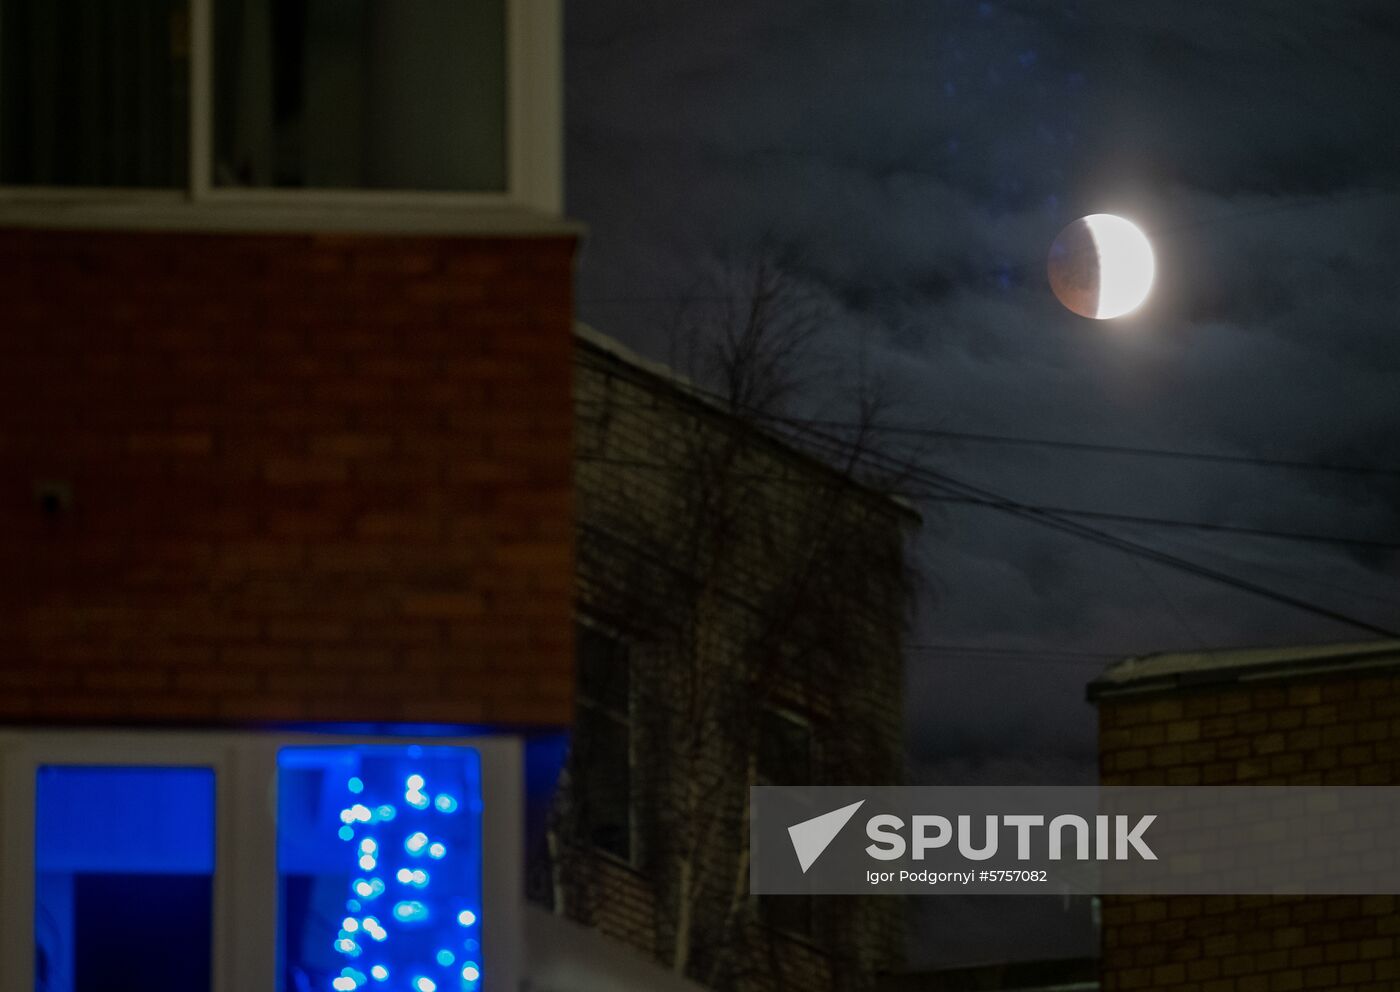 Russia Moon Eclipse